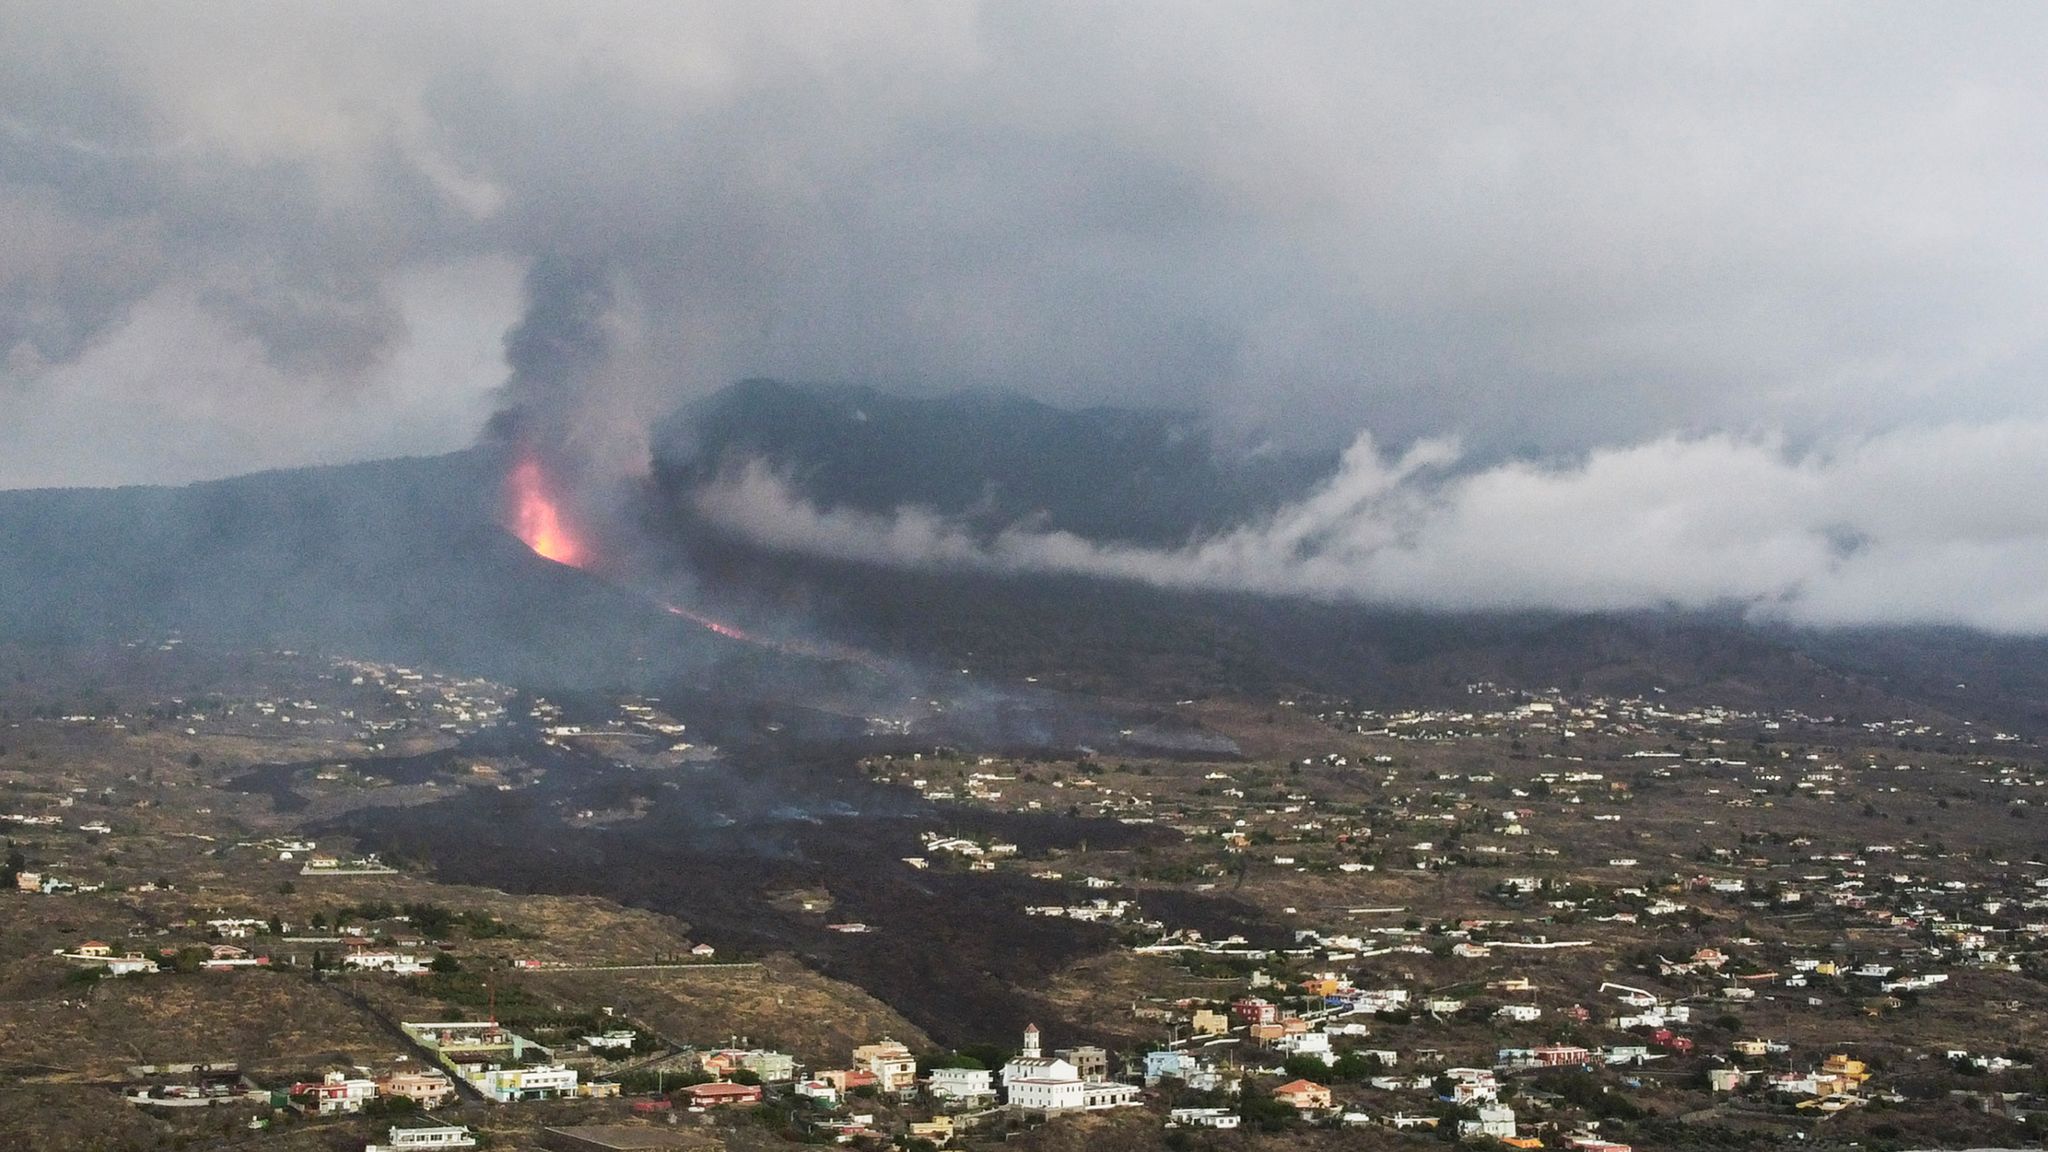 La Palma volcano eruption Thousands of people evacuated with many